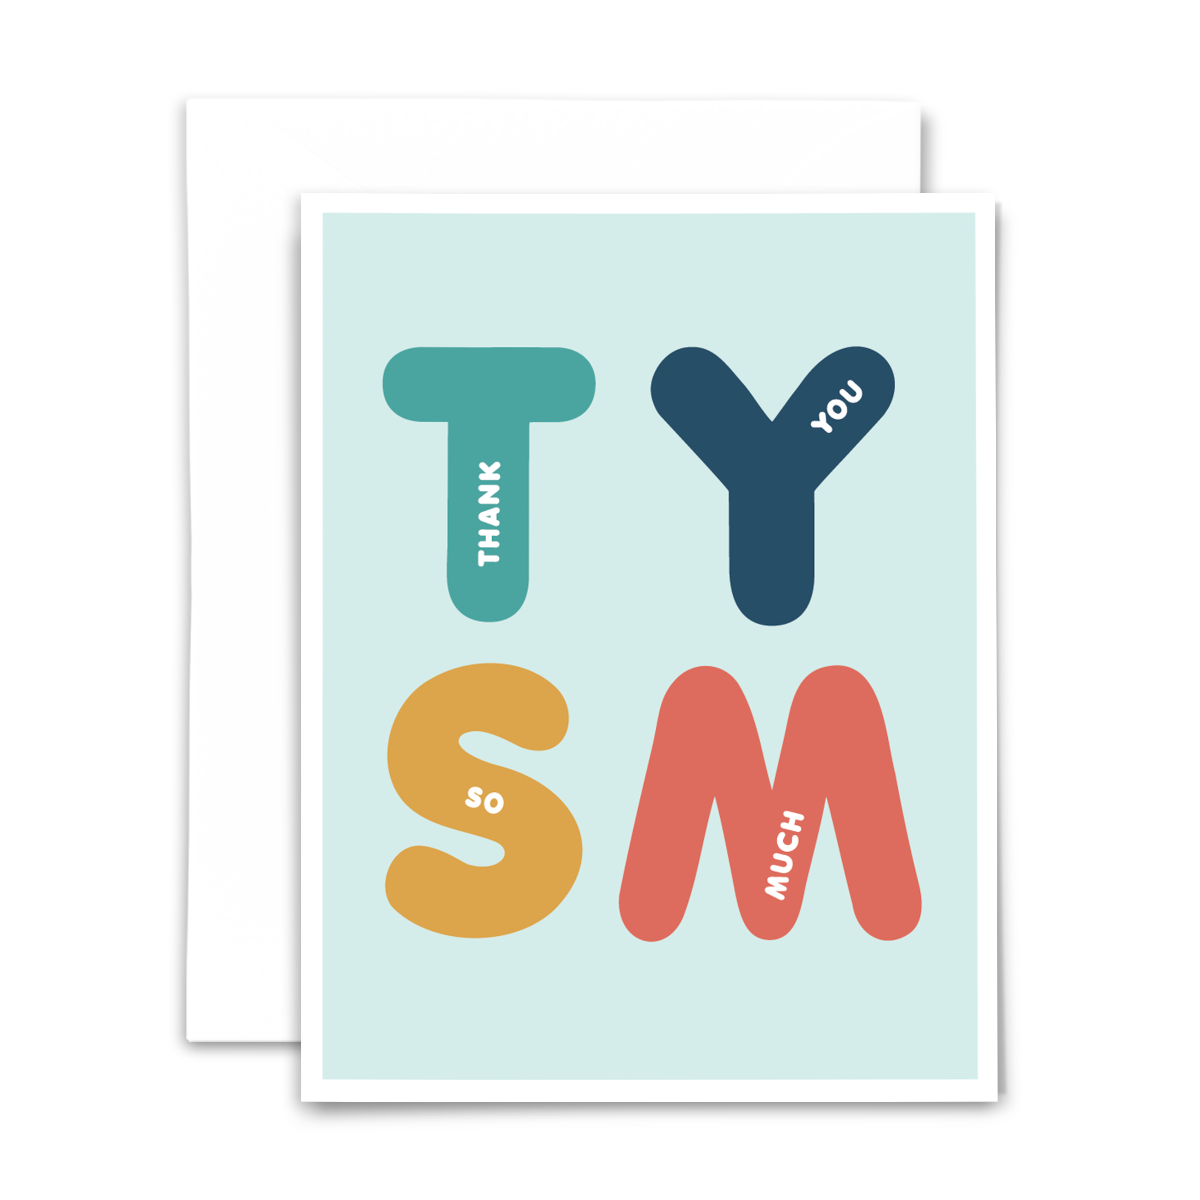 TYSM Thank You So Much blank greeting card; chunky colorful font on light teal background with white border; white envelope